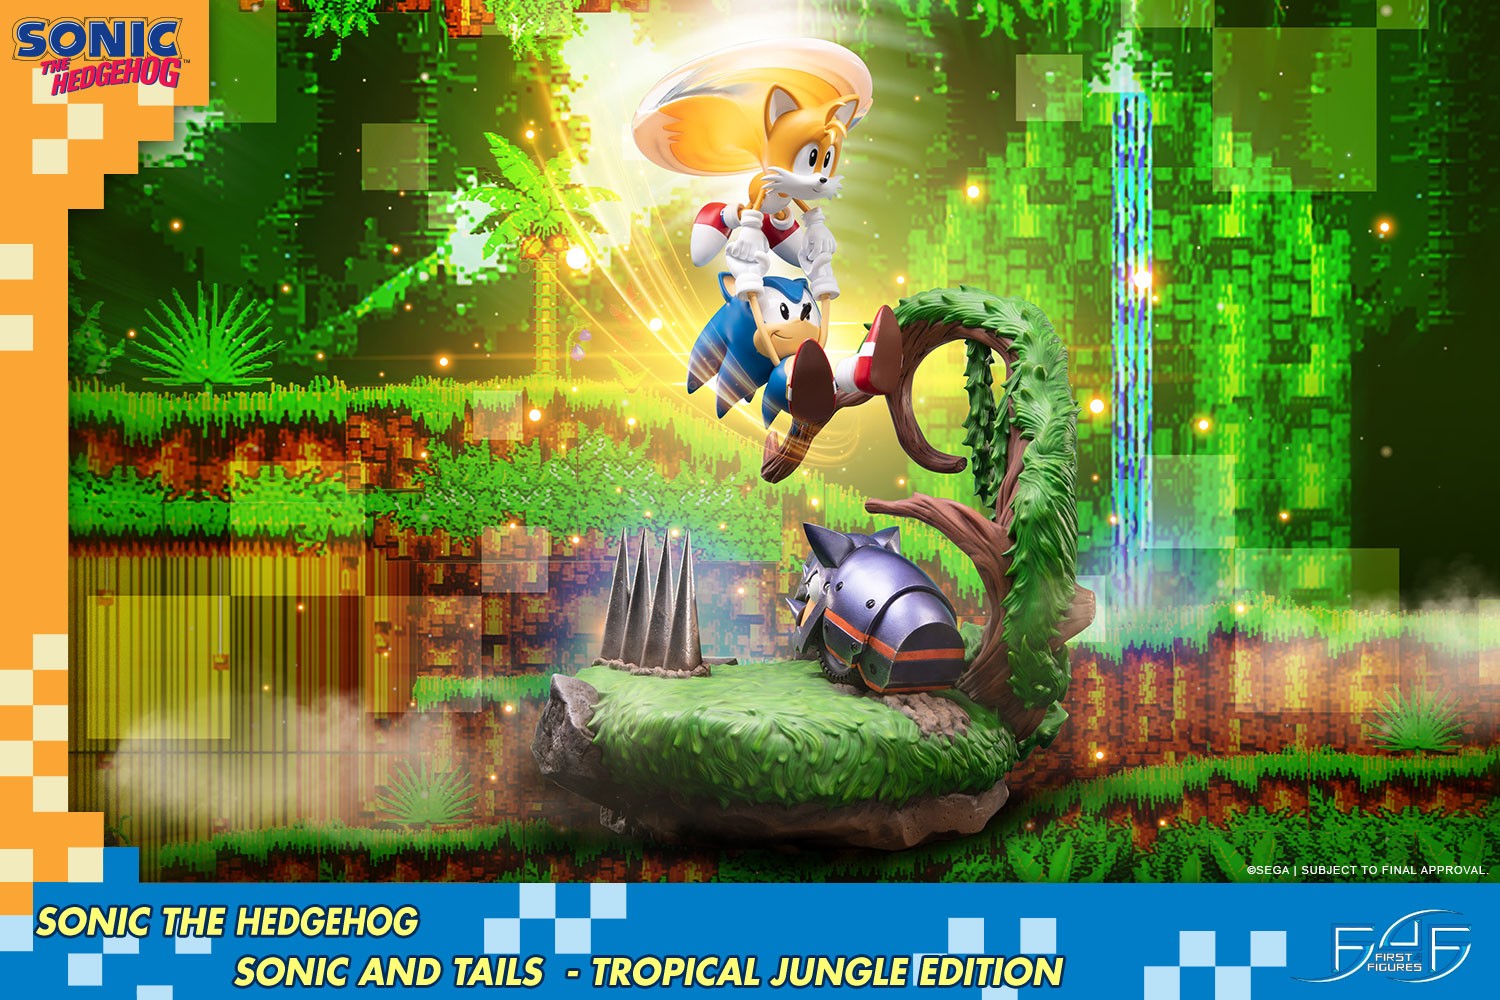 Sonic the Hedgehog – Sonic and Tails Tropical Jungle Edition